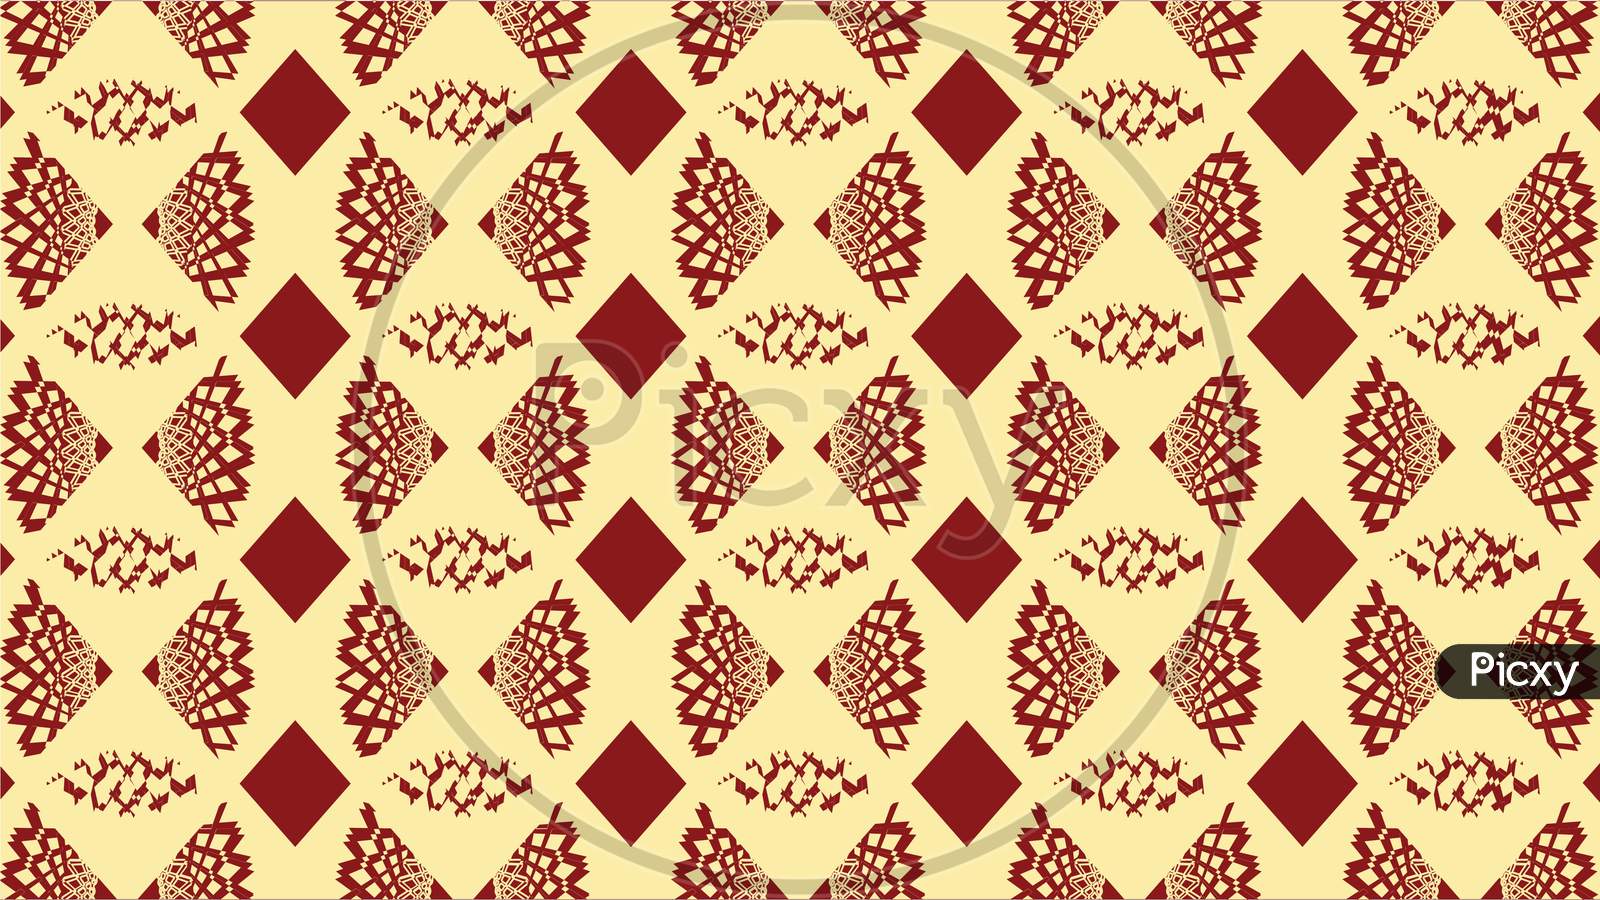 Picture Of A Red Triangle Pattern, Abstract Wallpaper Having In Yellow Background.